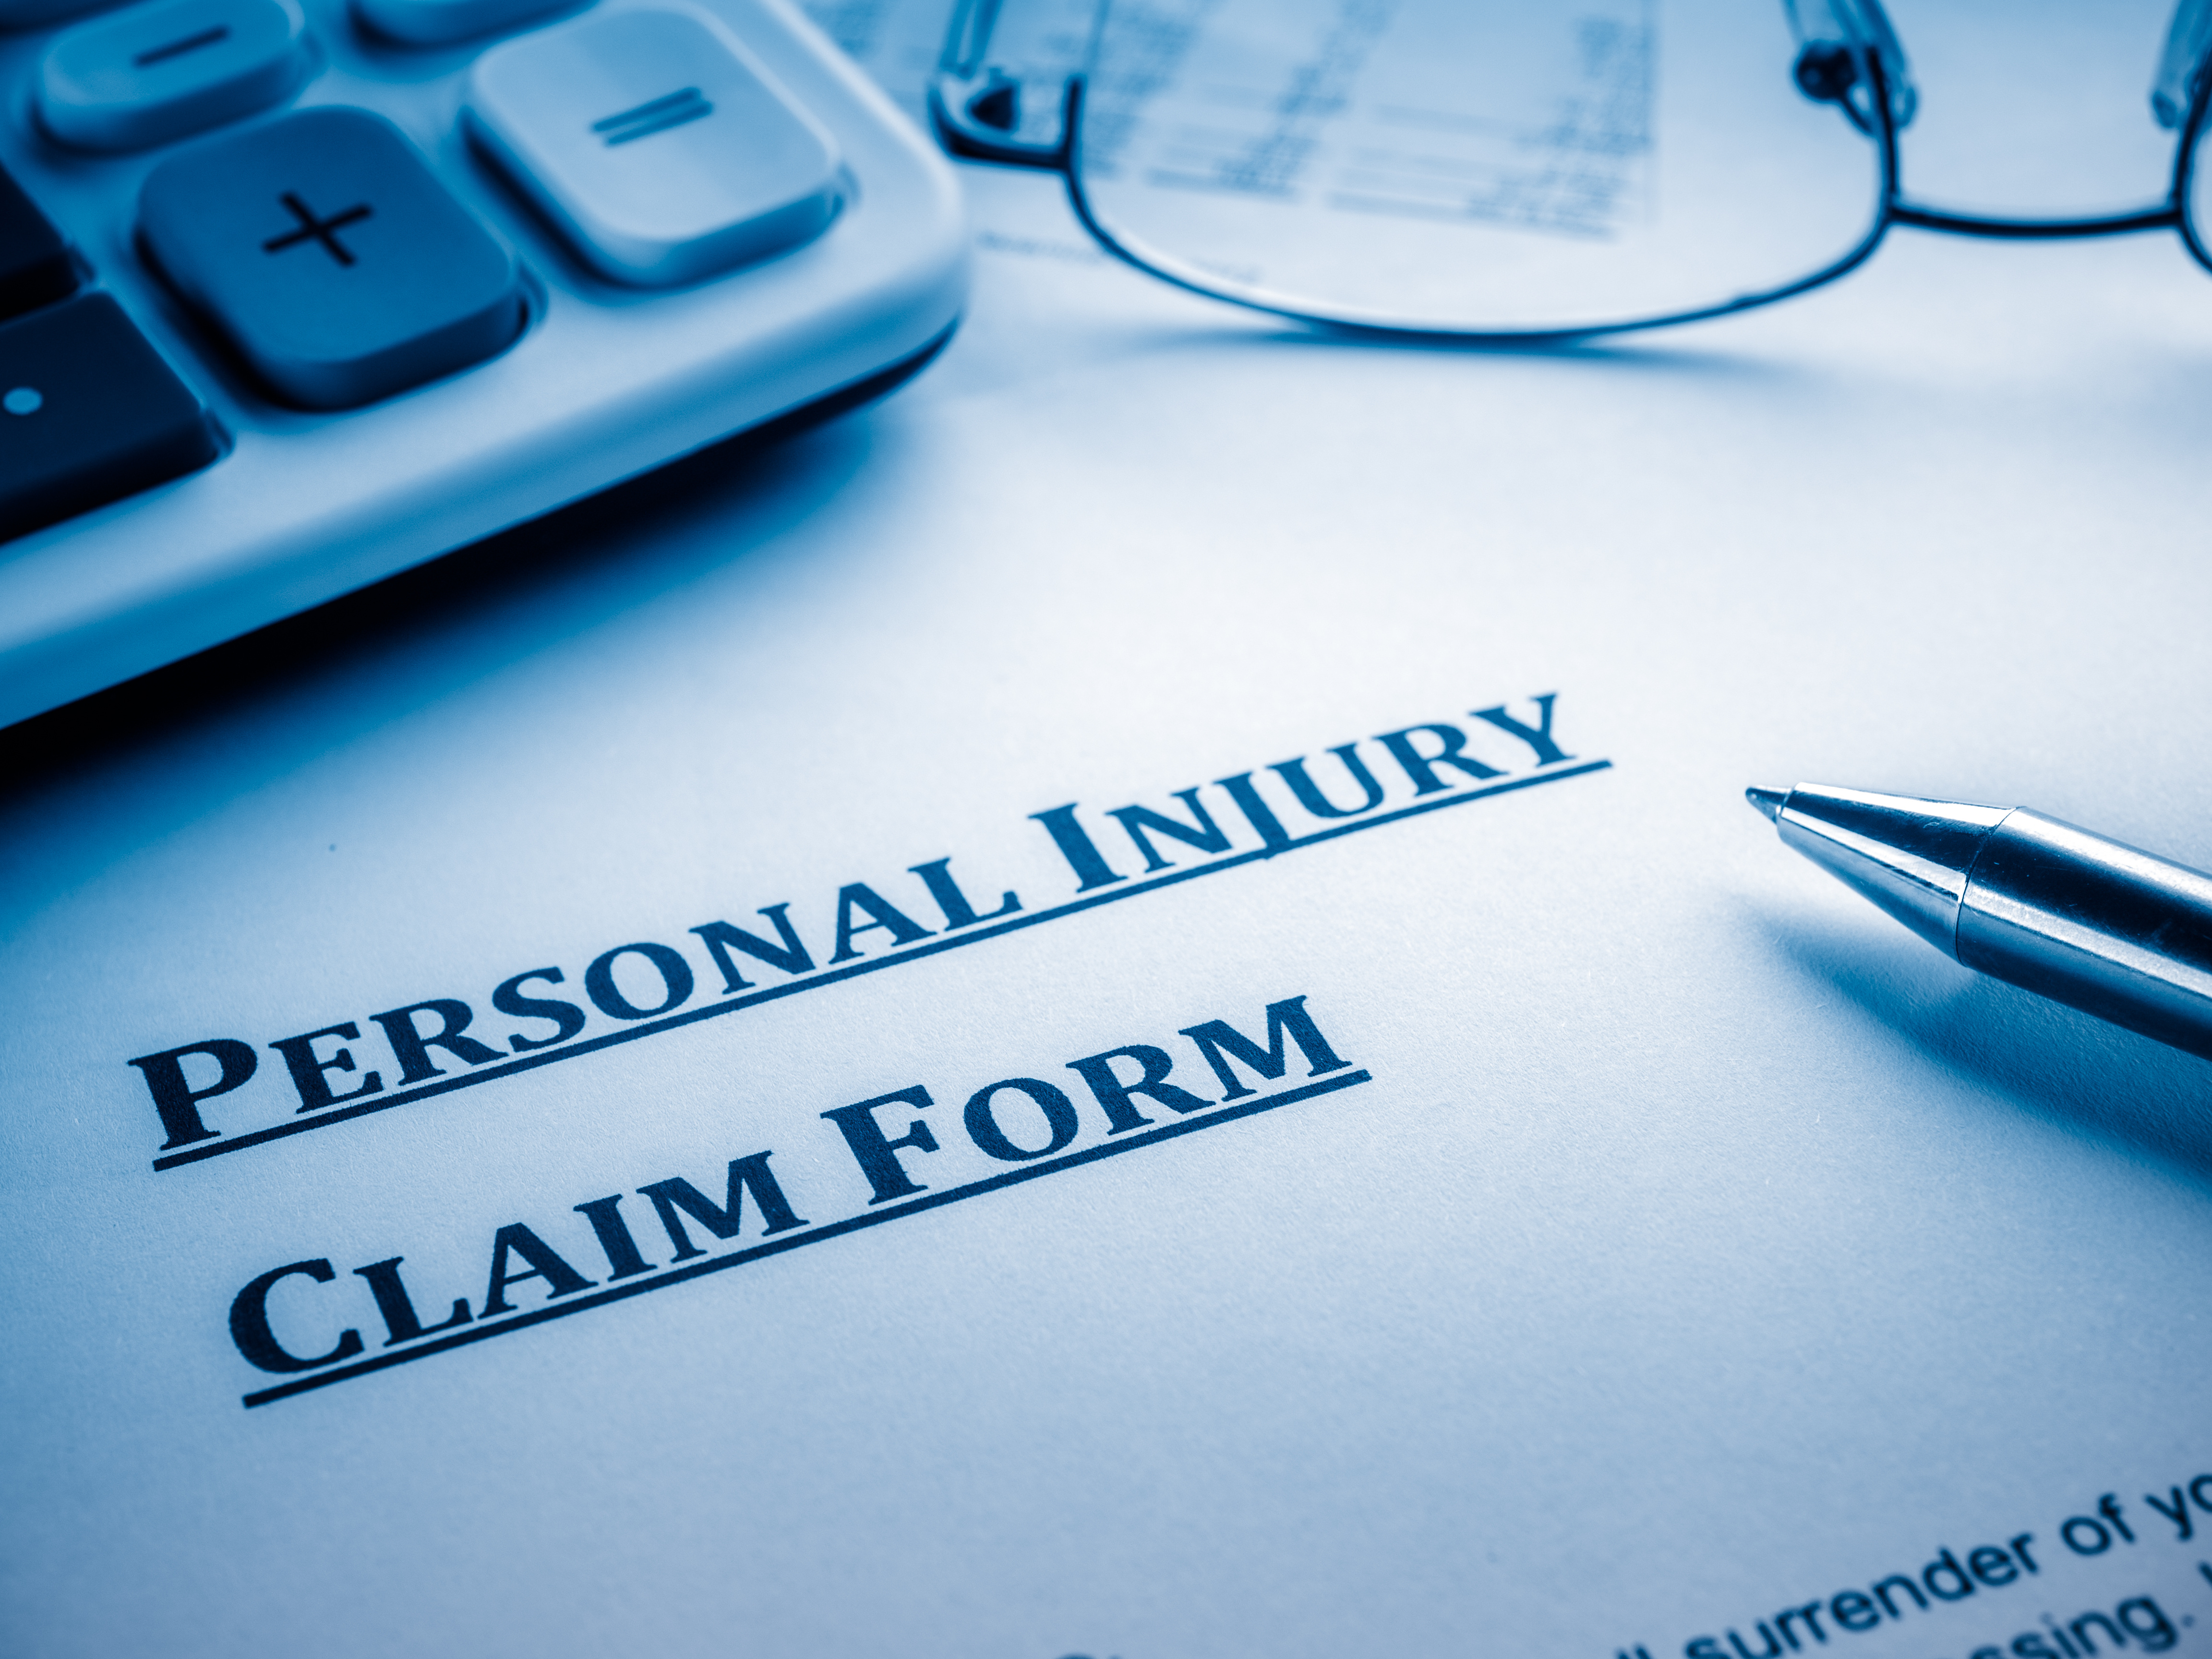 Image of an injury claim form, representing the need for employers to know about WV workers' compensation compensability.